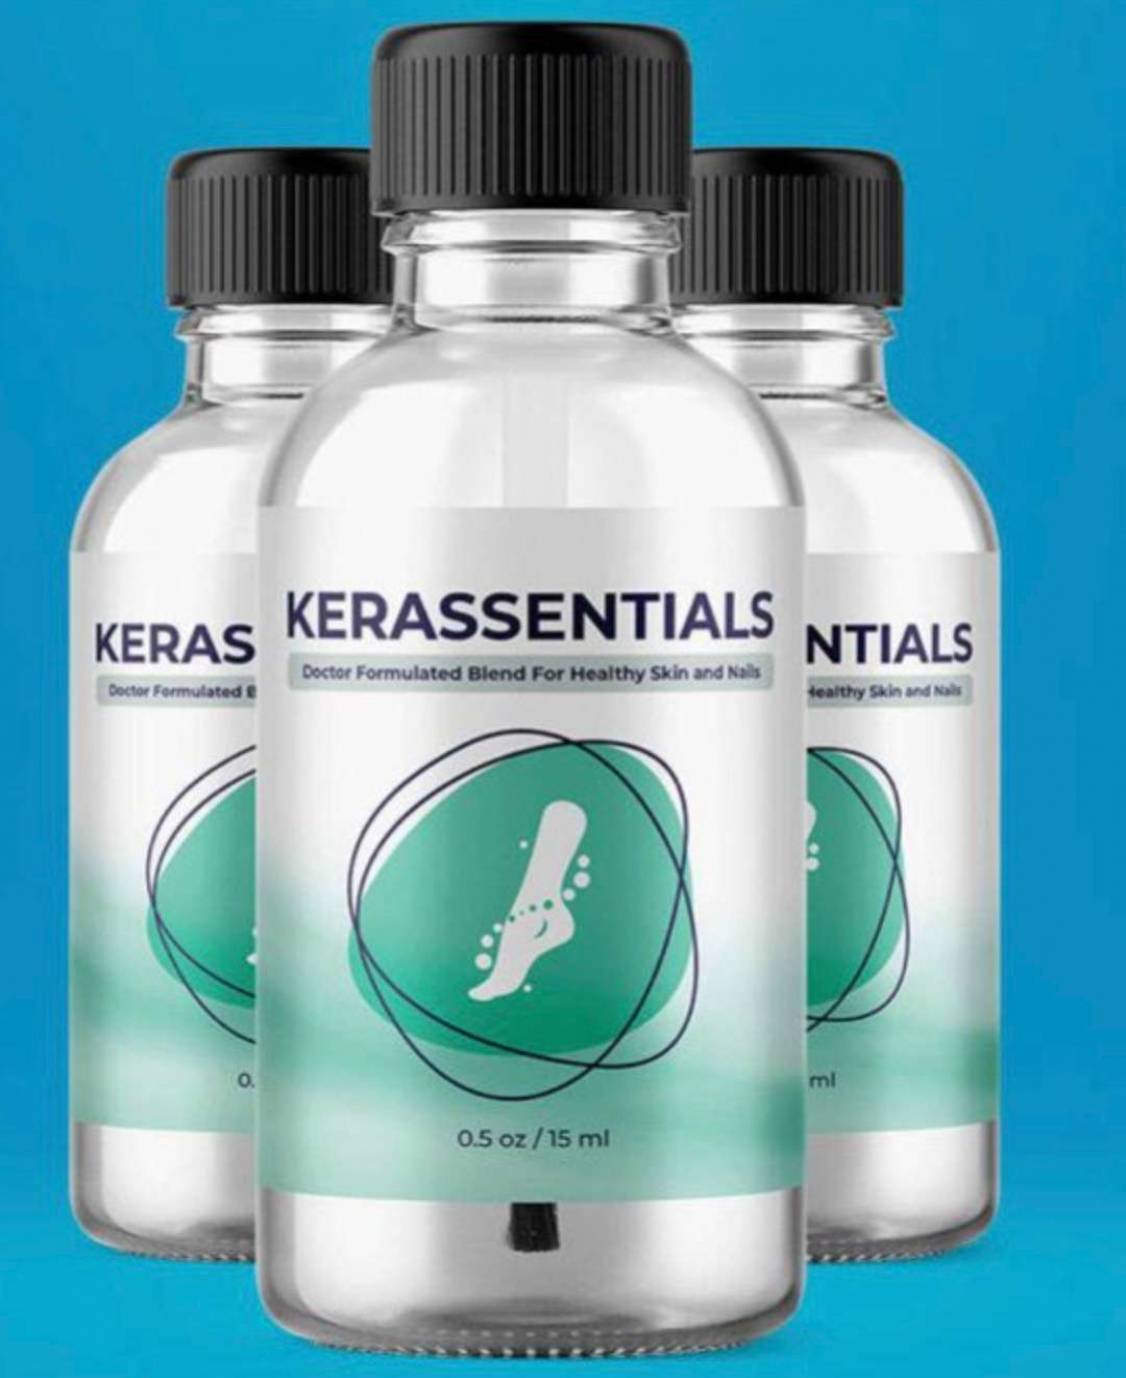 Real User Review Of Kerassentials